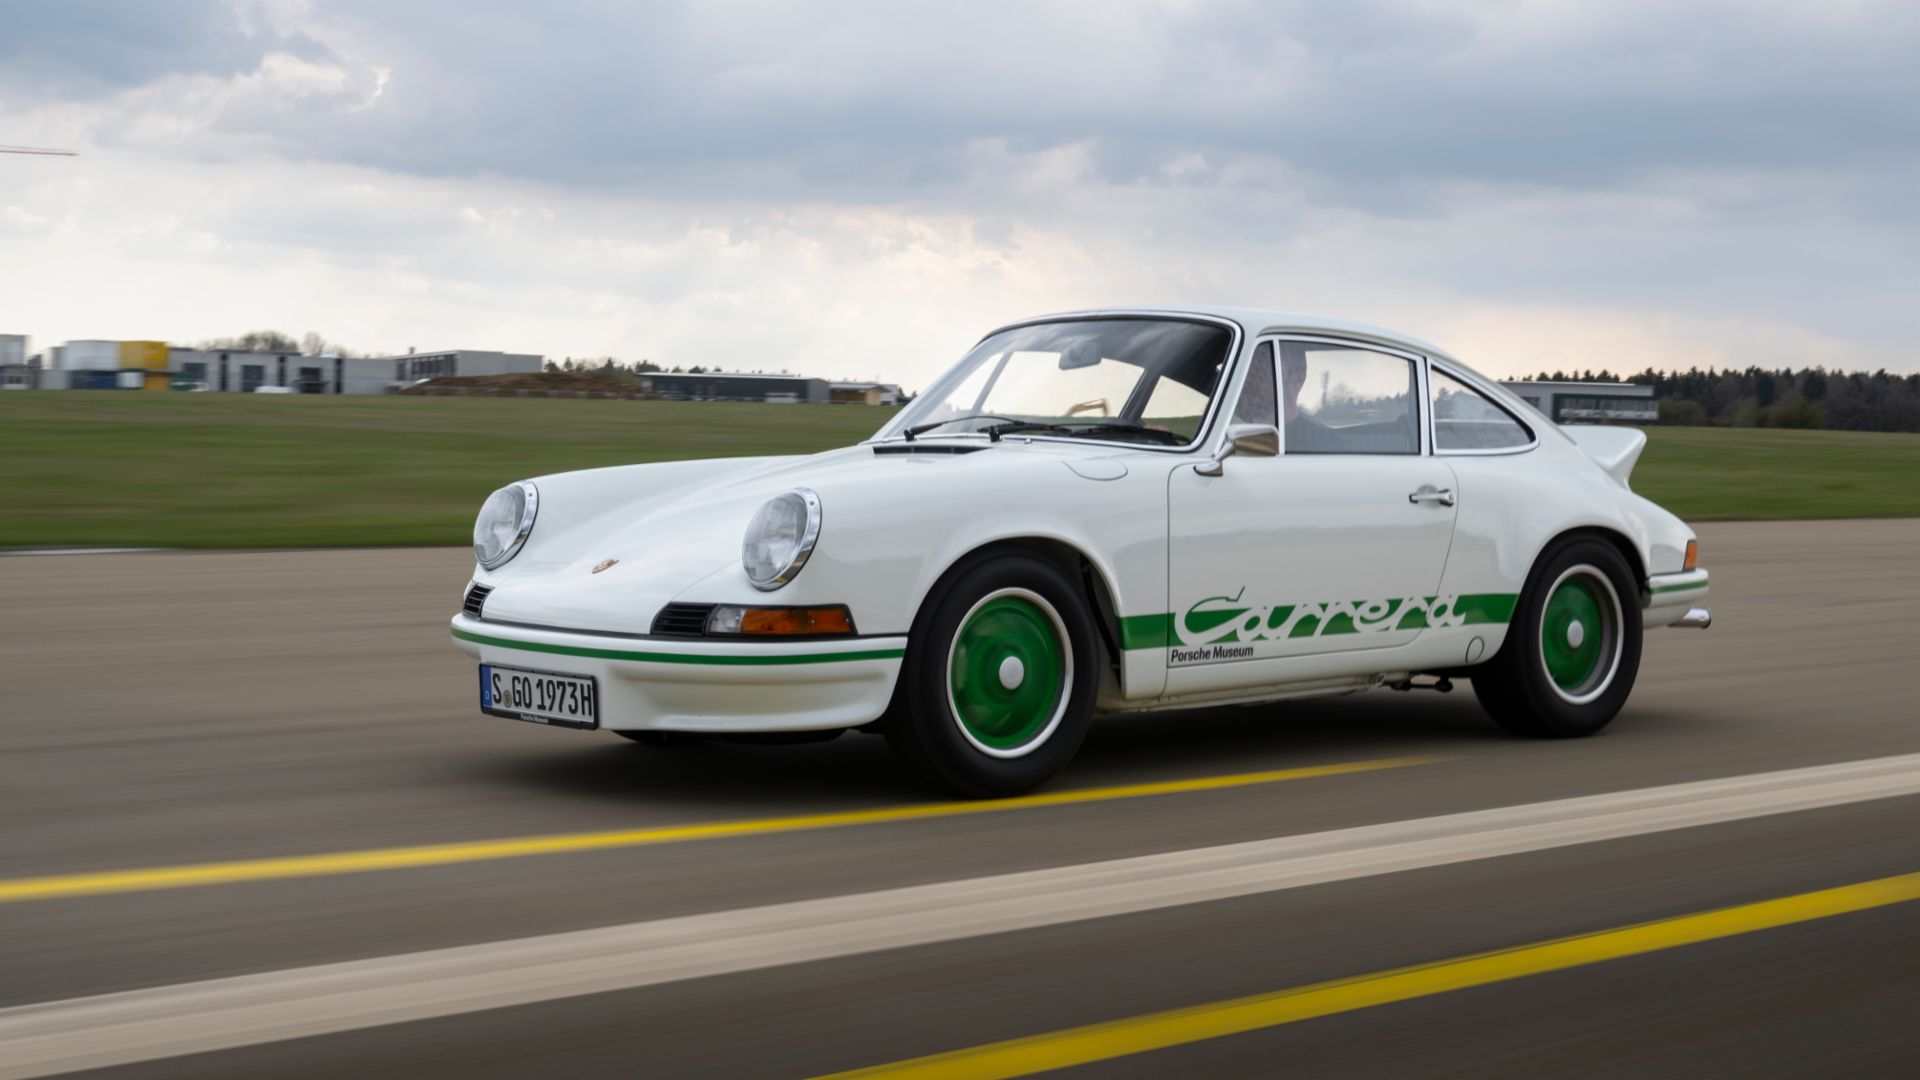 DuckTales: History of the Porsche ducktail and Carrera RS 2.7